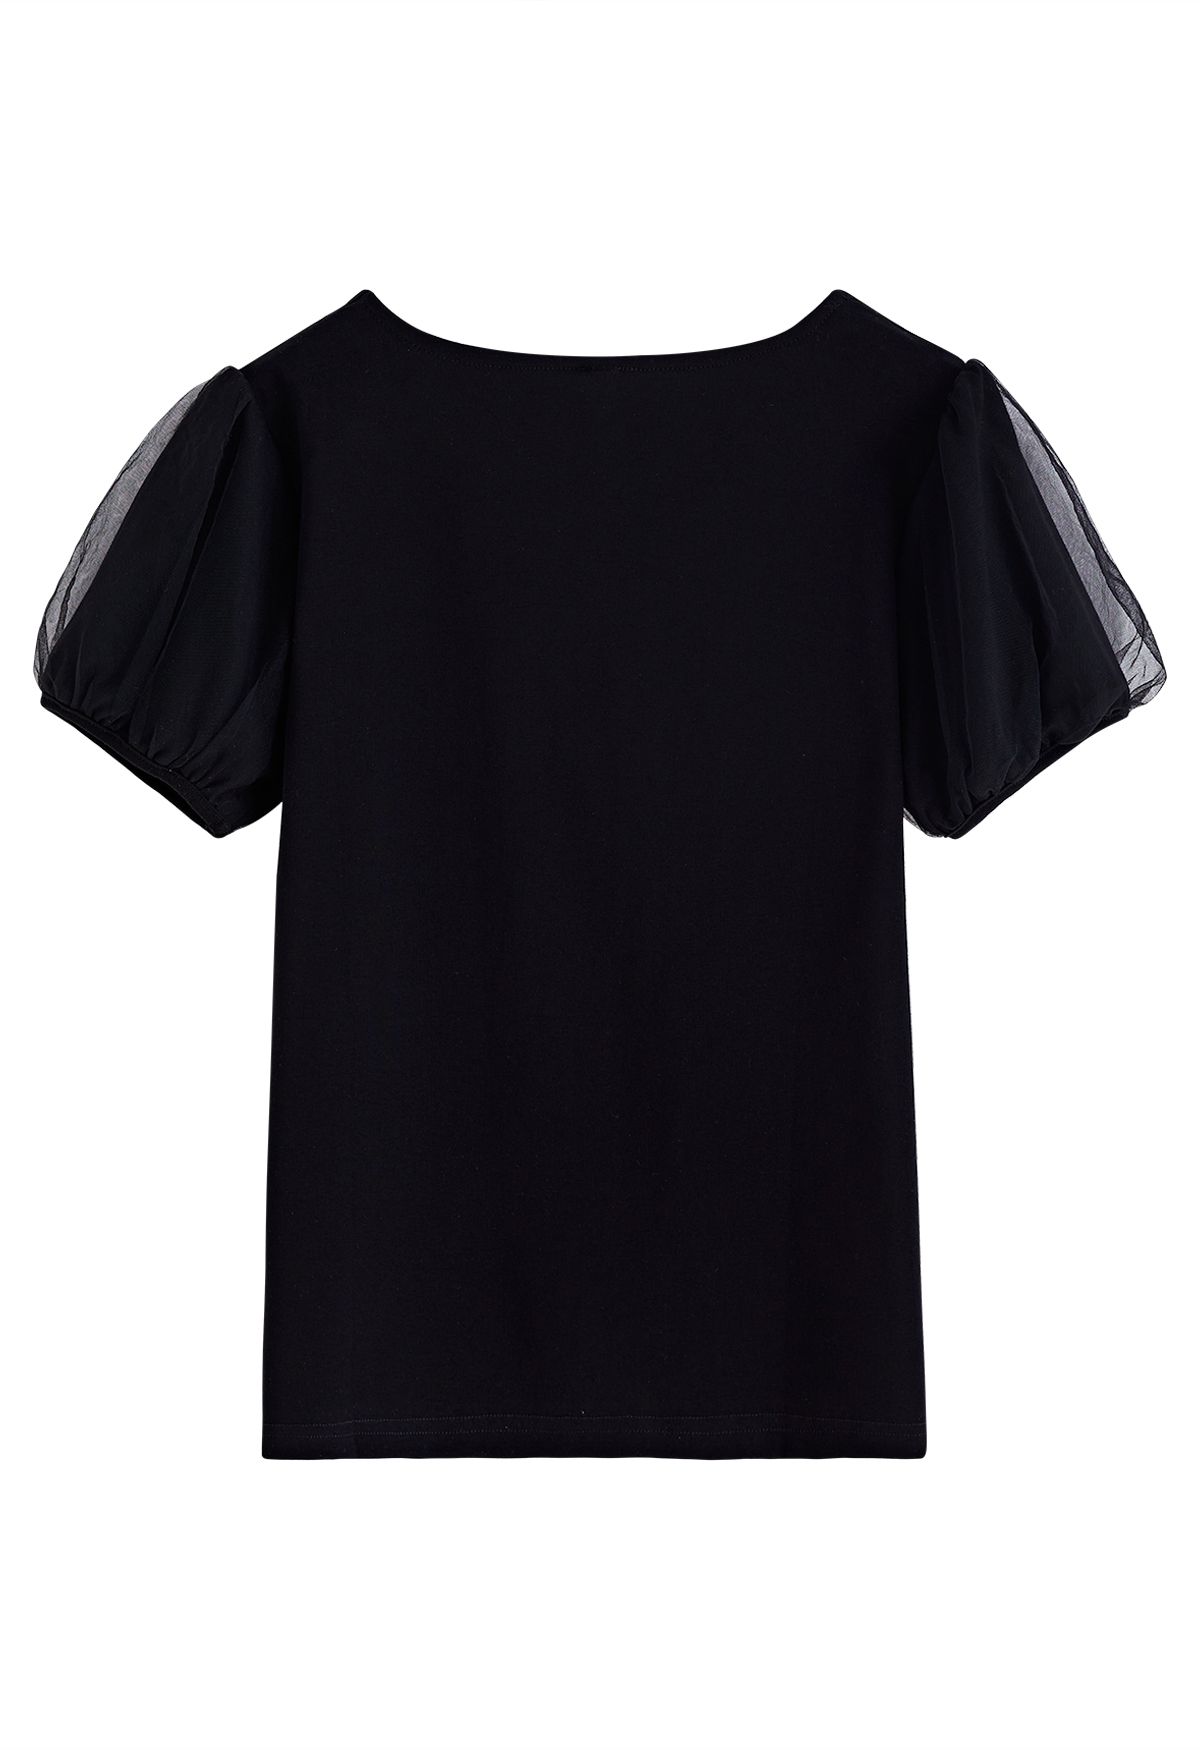 Square Neck Mesh Bubble Sleeves Top in Black